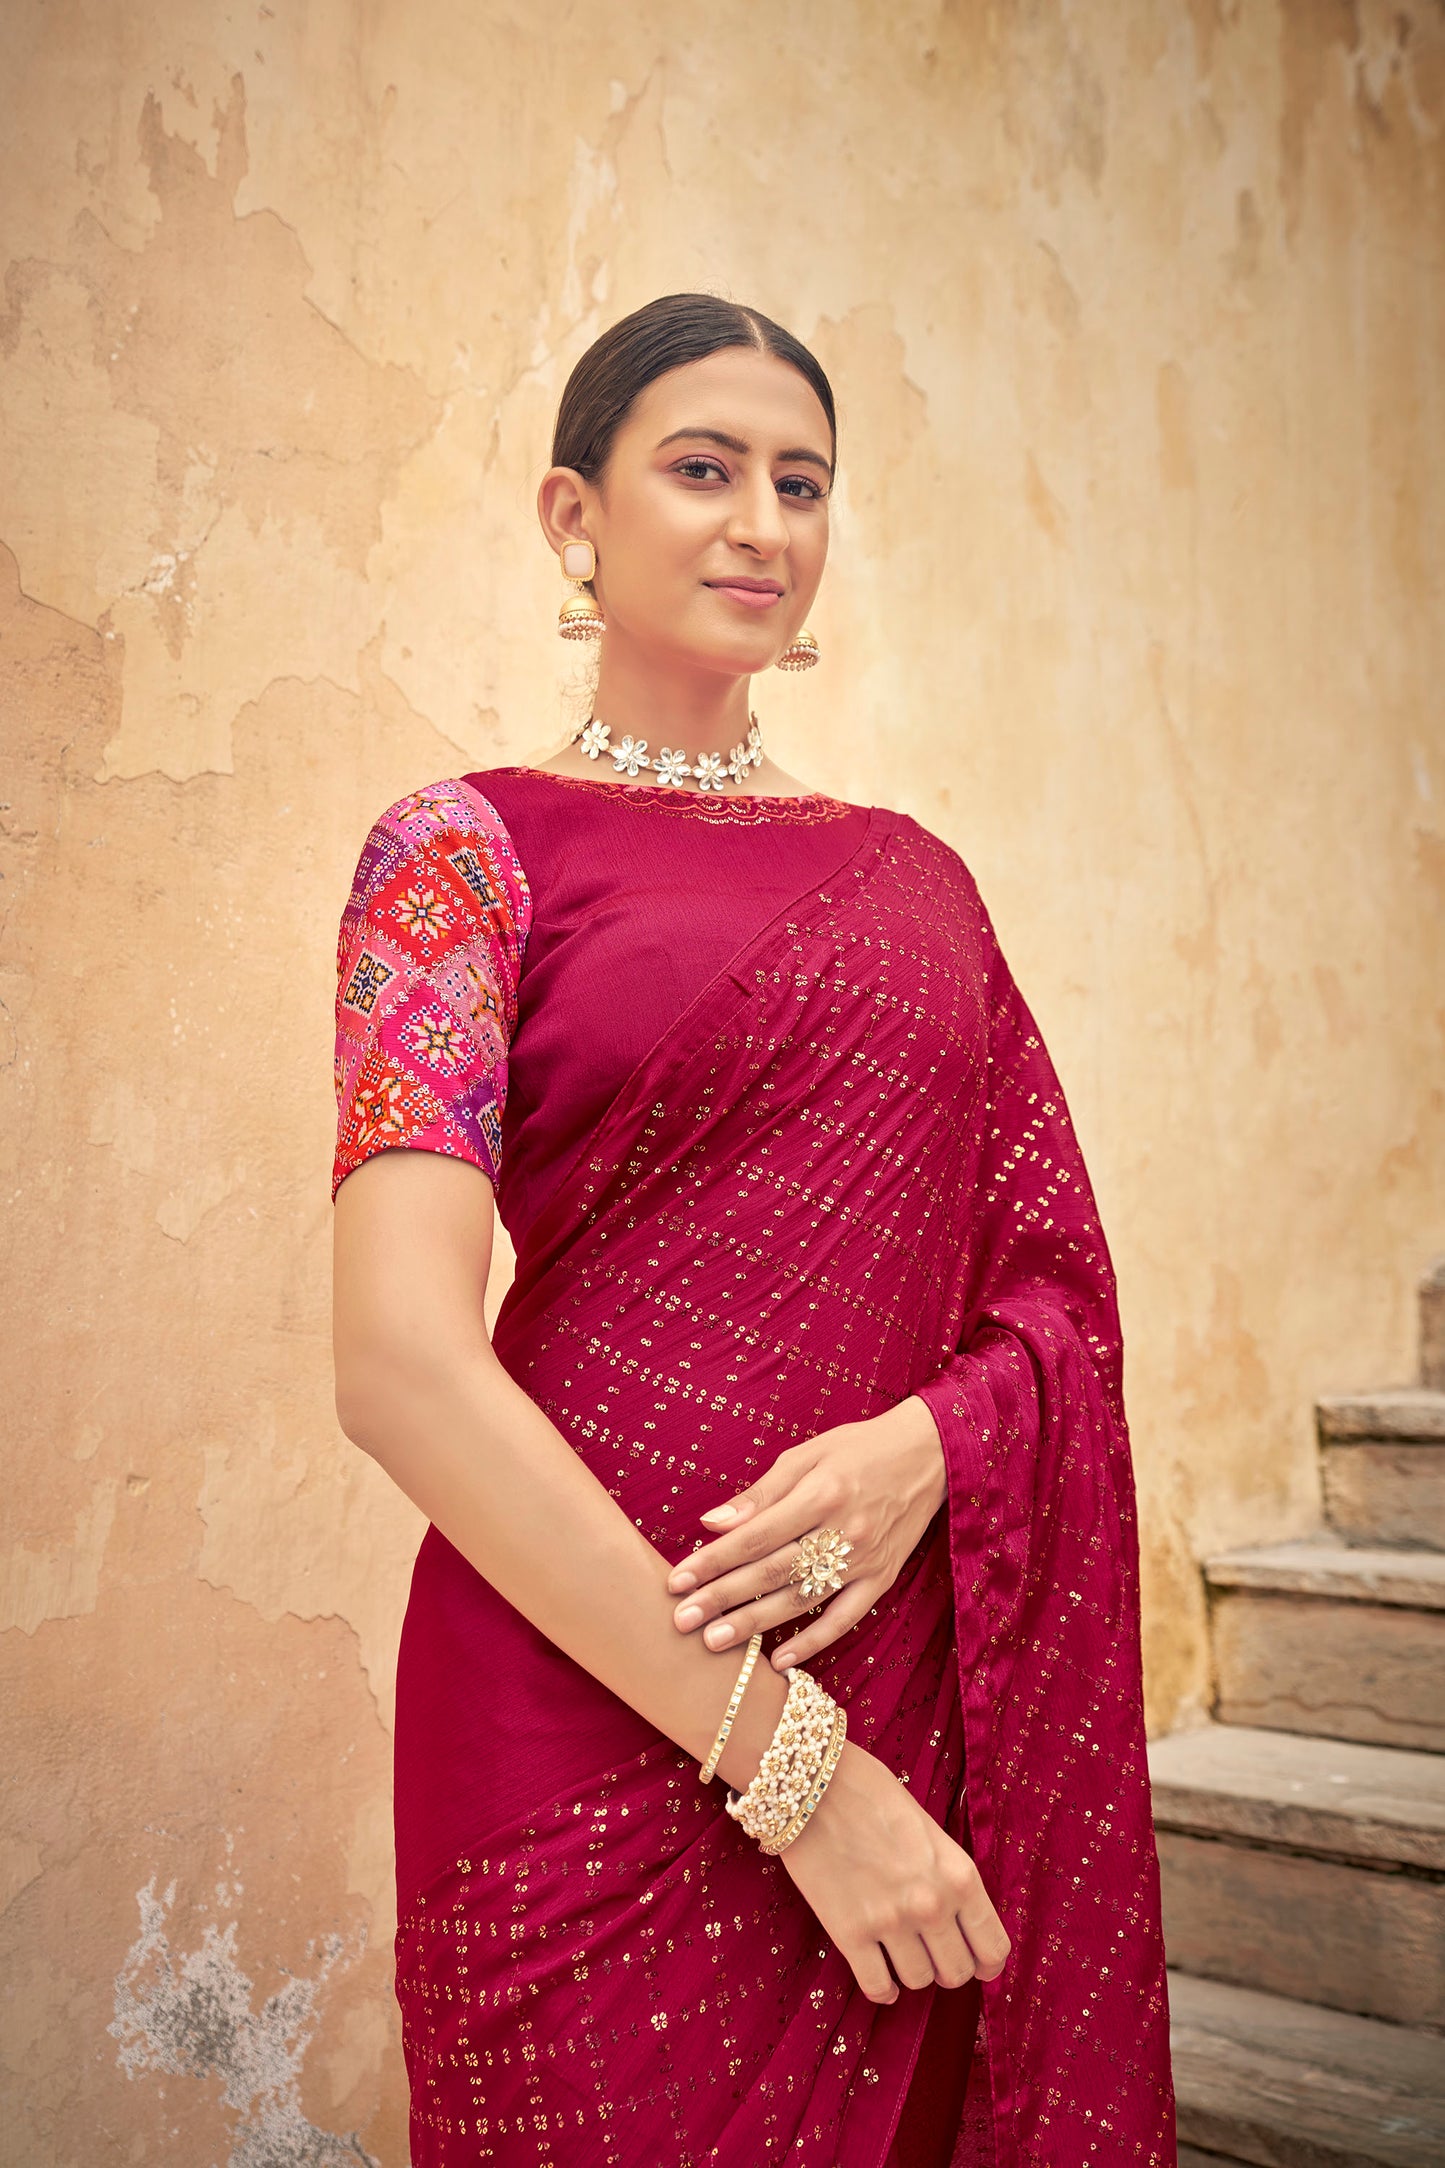 Dark Pink Color Chinnon Sequence Work Saree